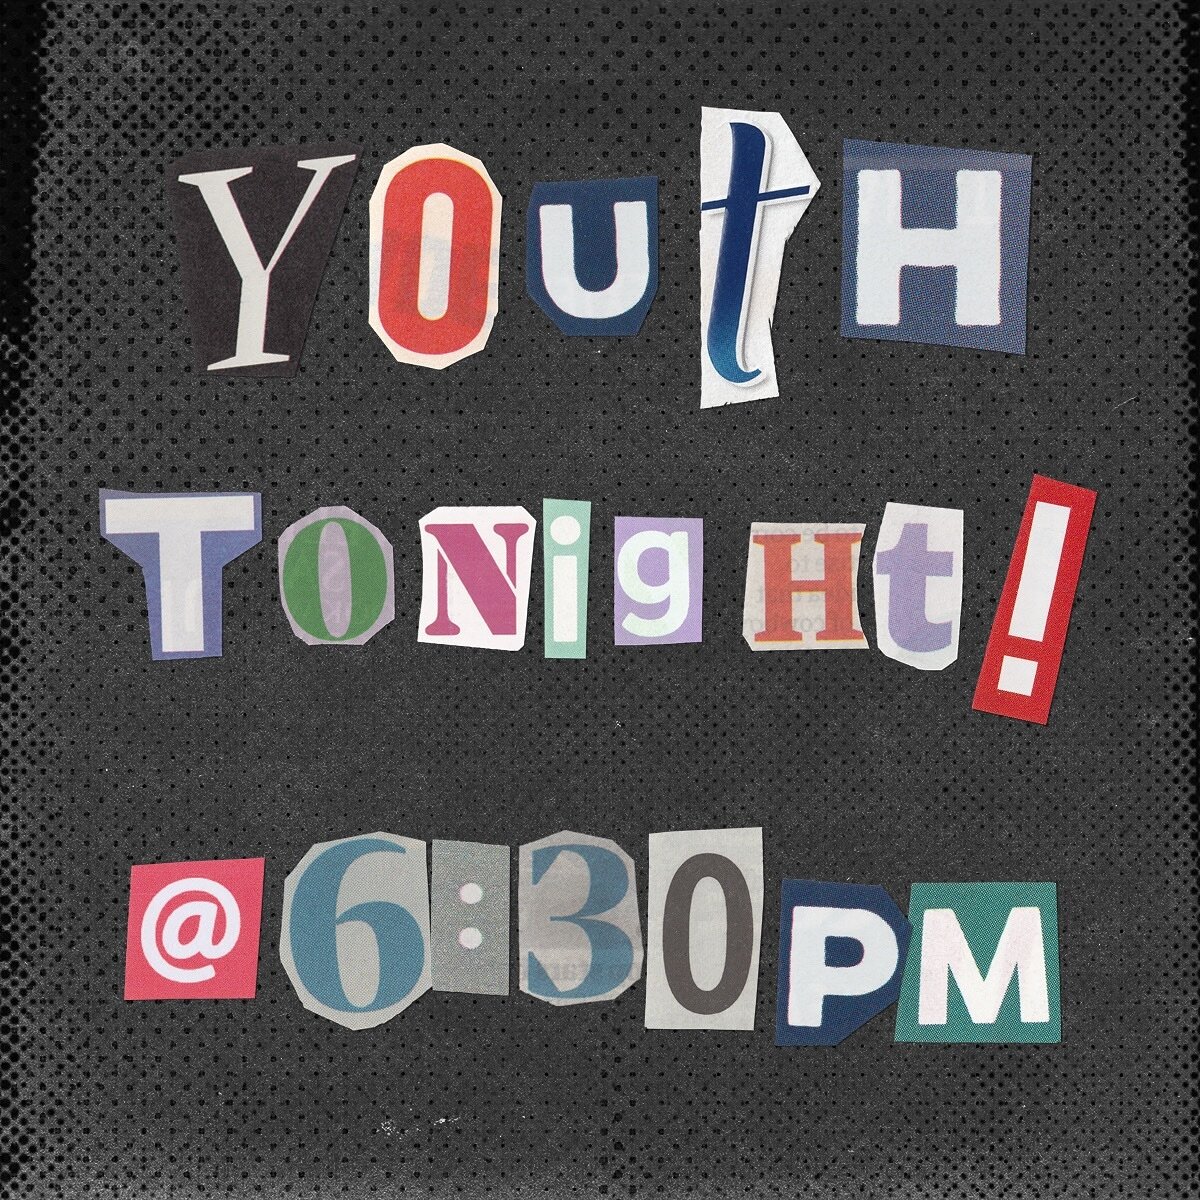 WHERE YOU GONNA BE TONIGHT????

We hope your answer is ET Youth! ✨ 

Can&rsquo;t wait to see you tonight at 6:30!